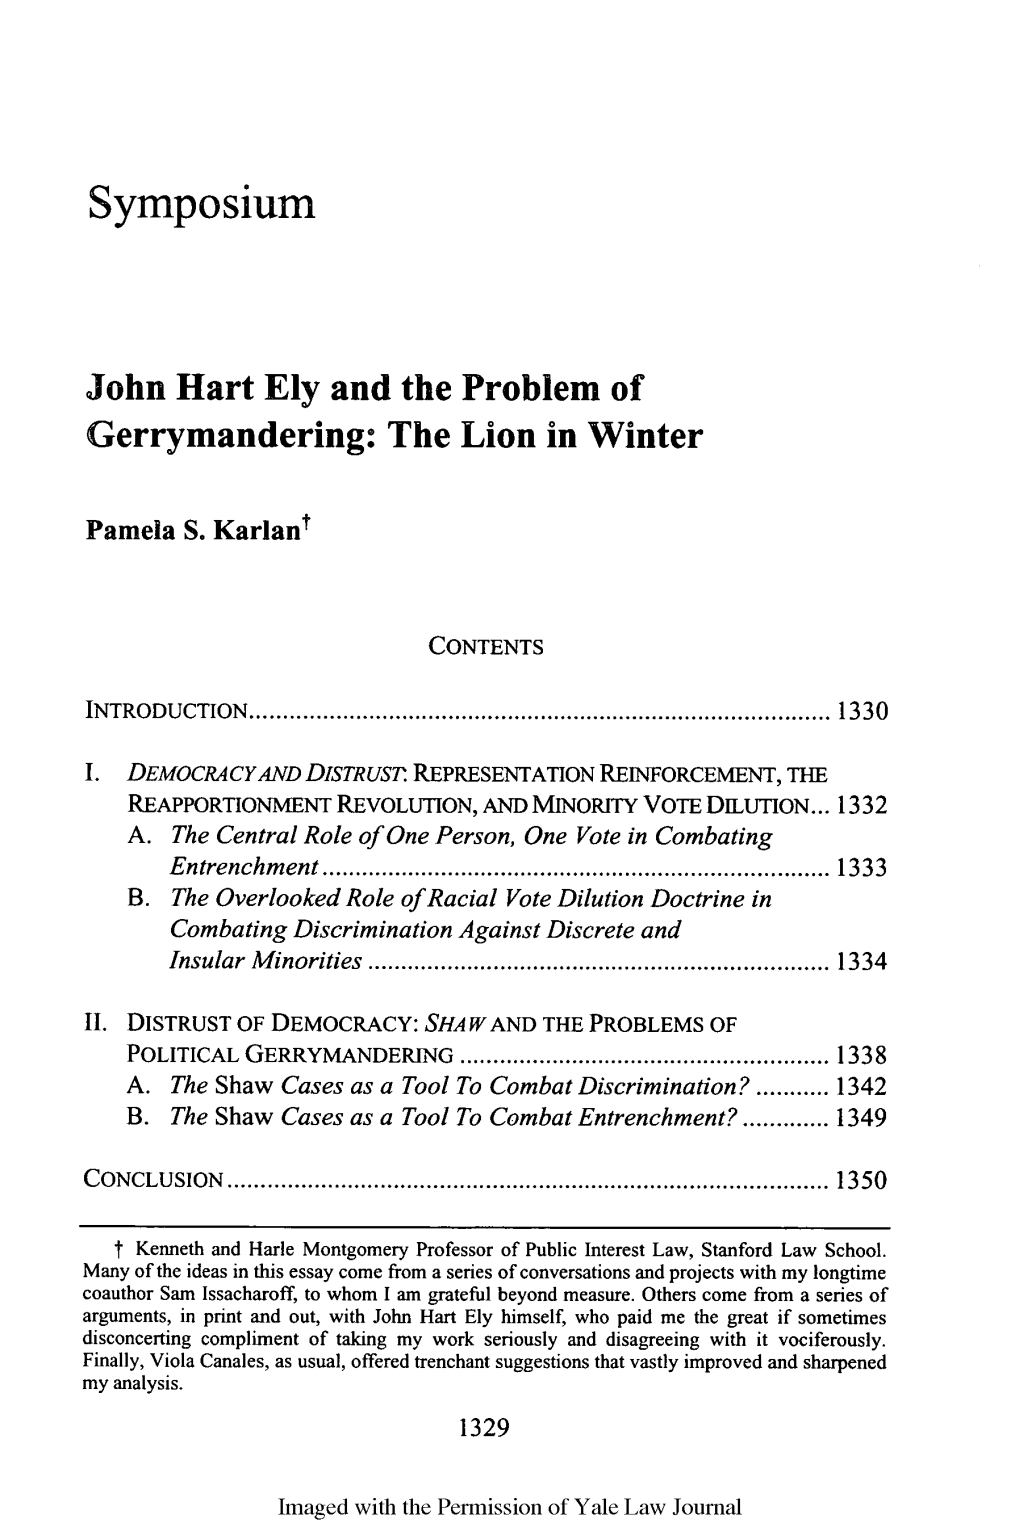 John Hart Ely and the Problem of Gerrymandering: the Lion in Winter